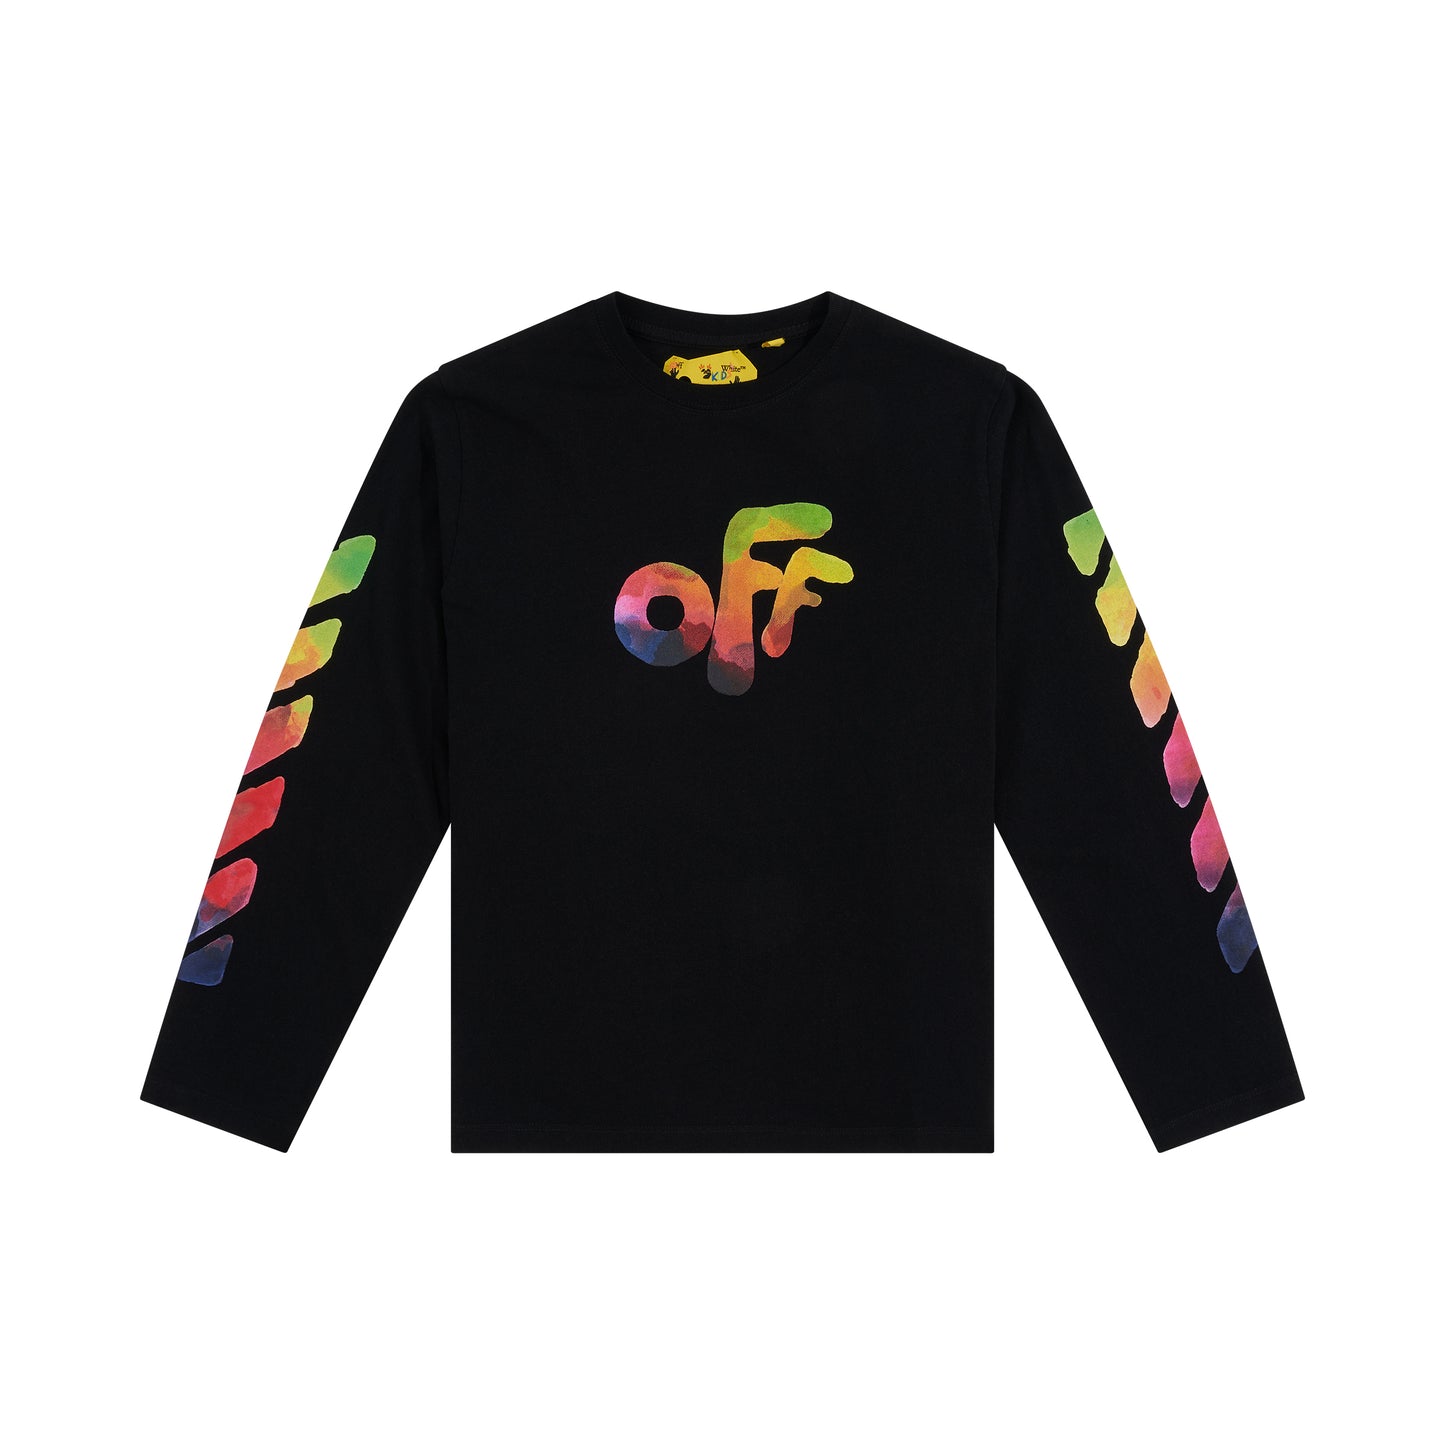 Off Rounded Watercolour Long Sleeve T-Shirt in Black